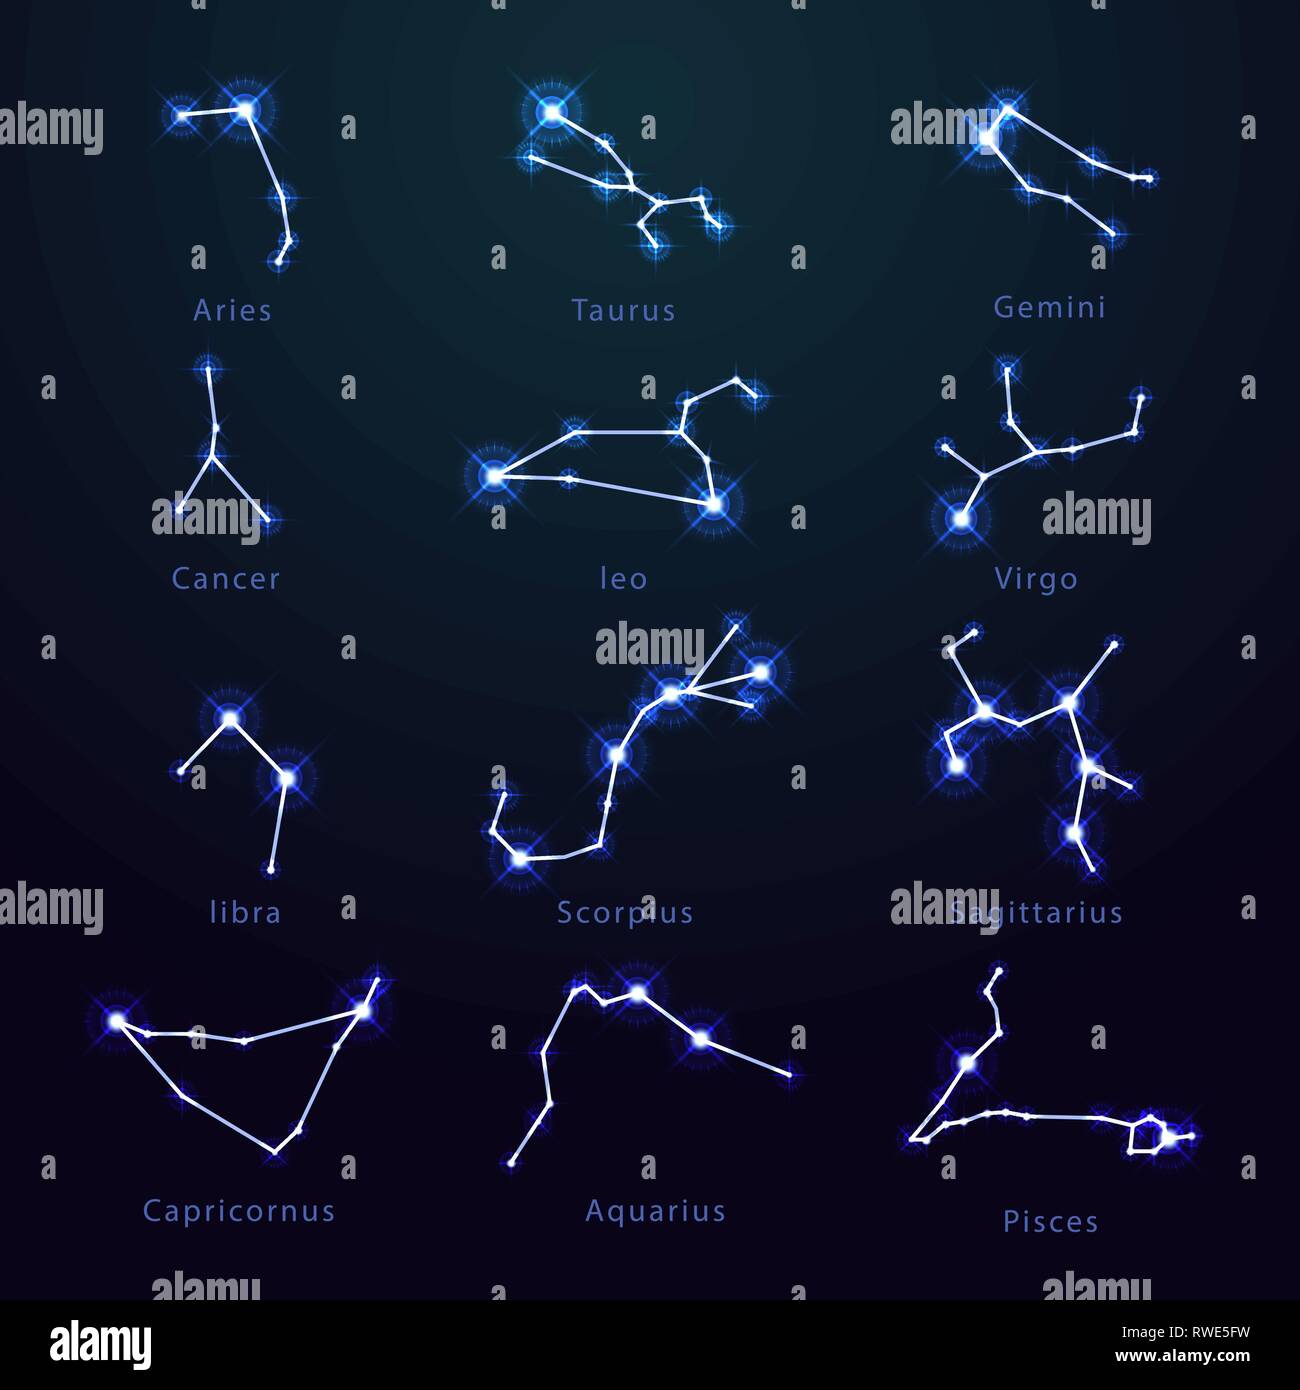 The New Star Signs